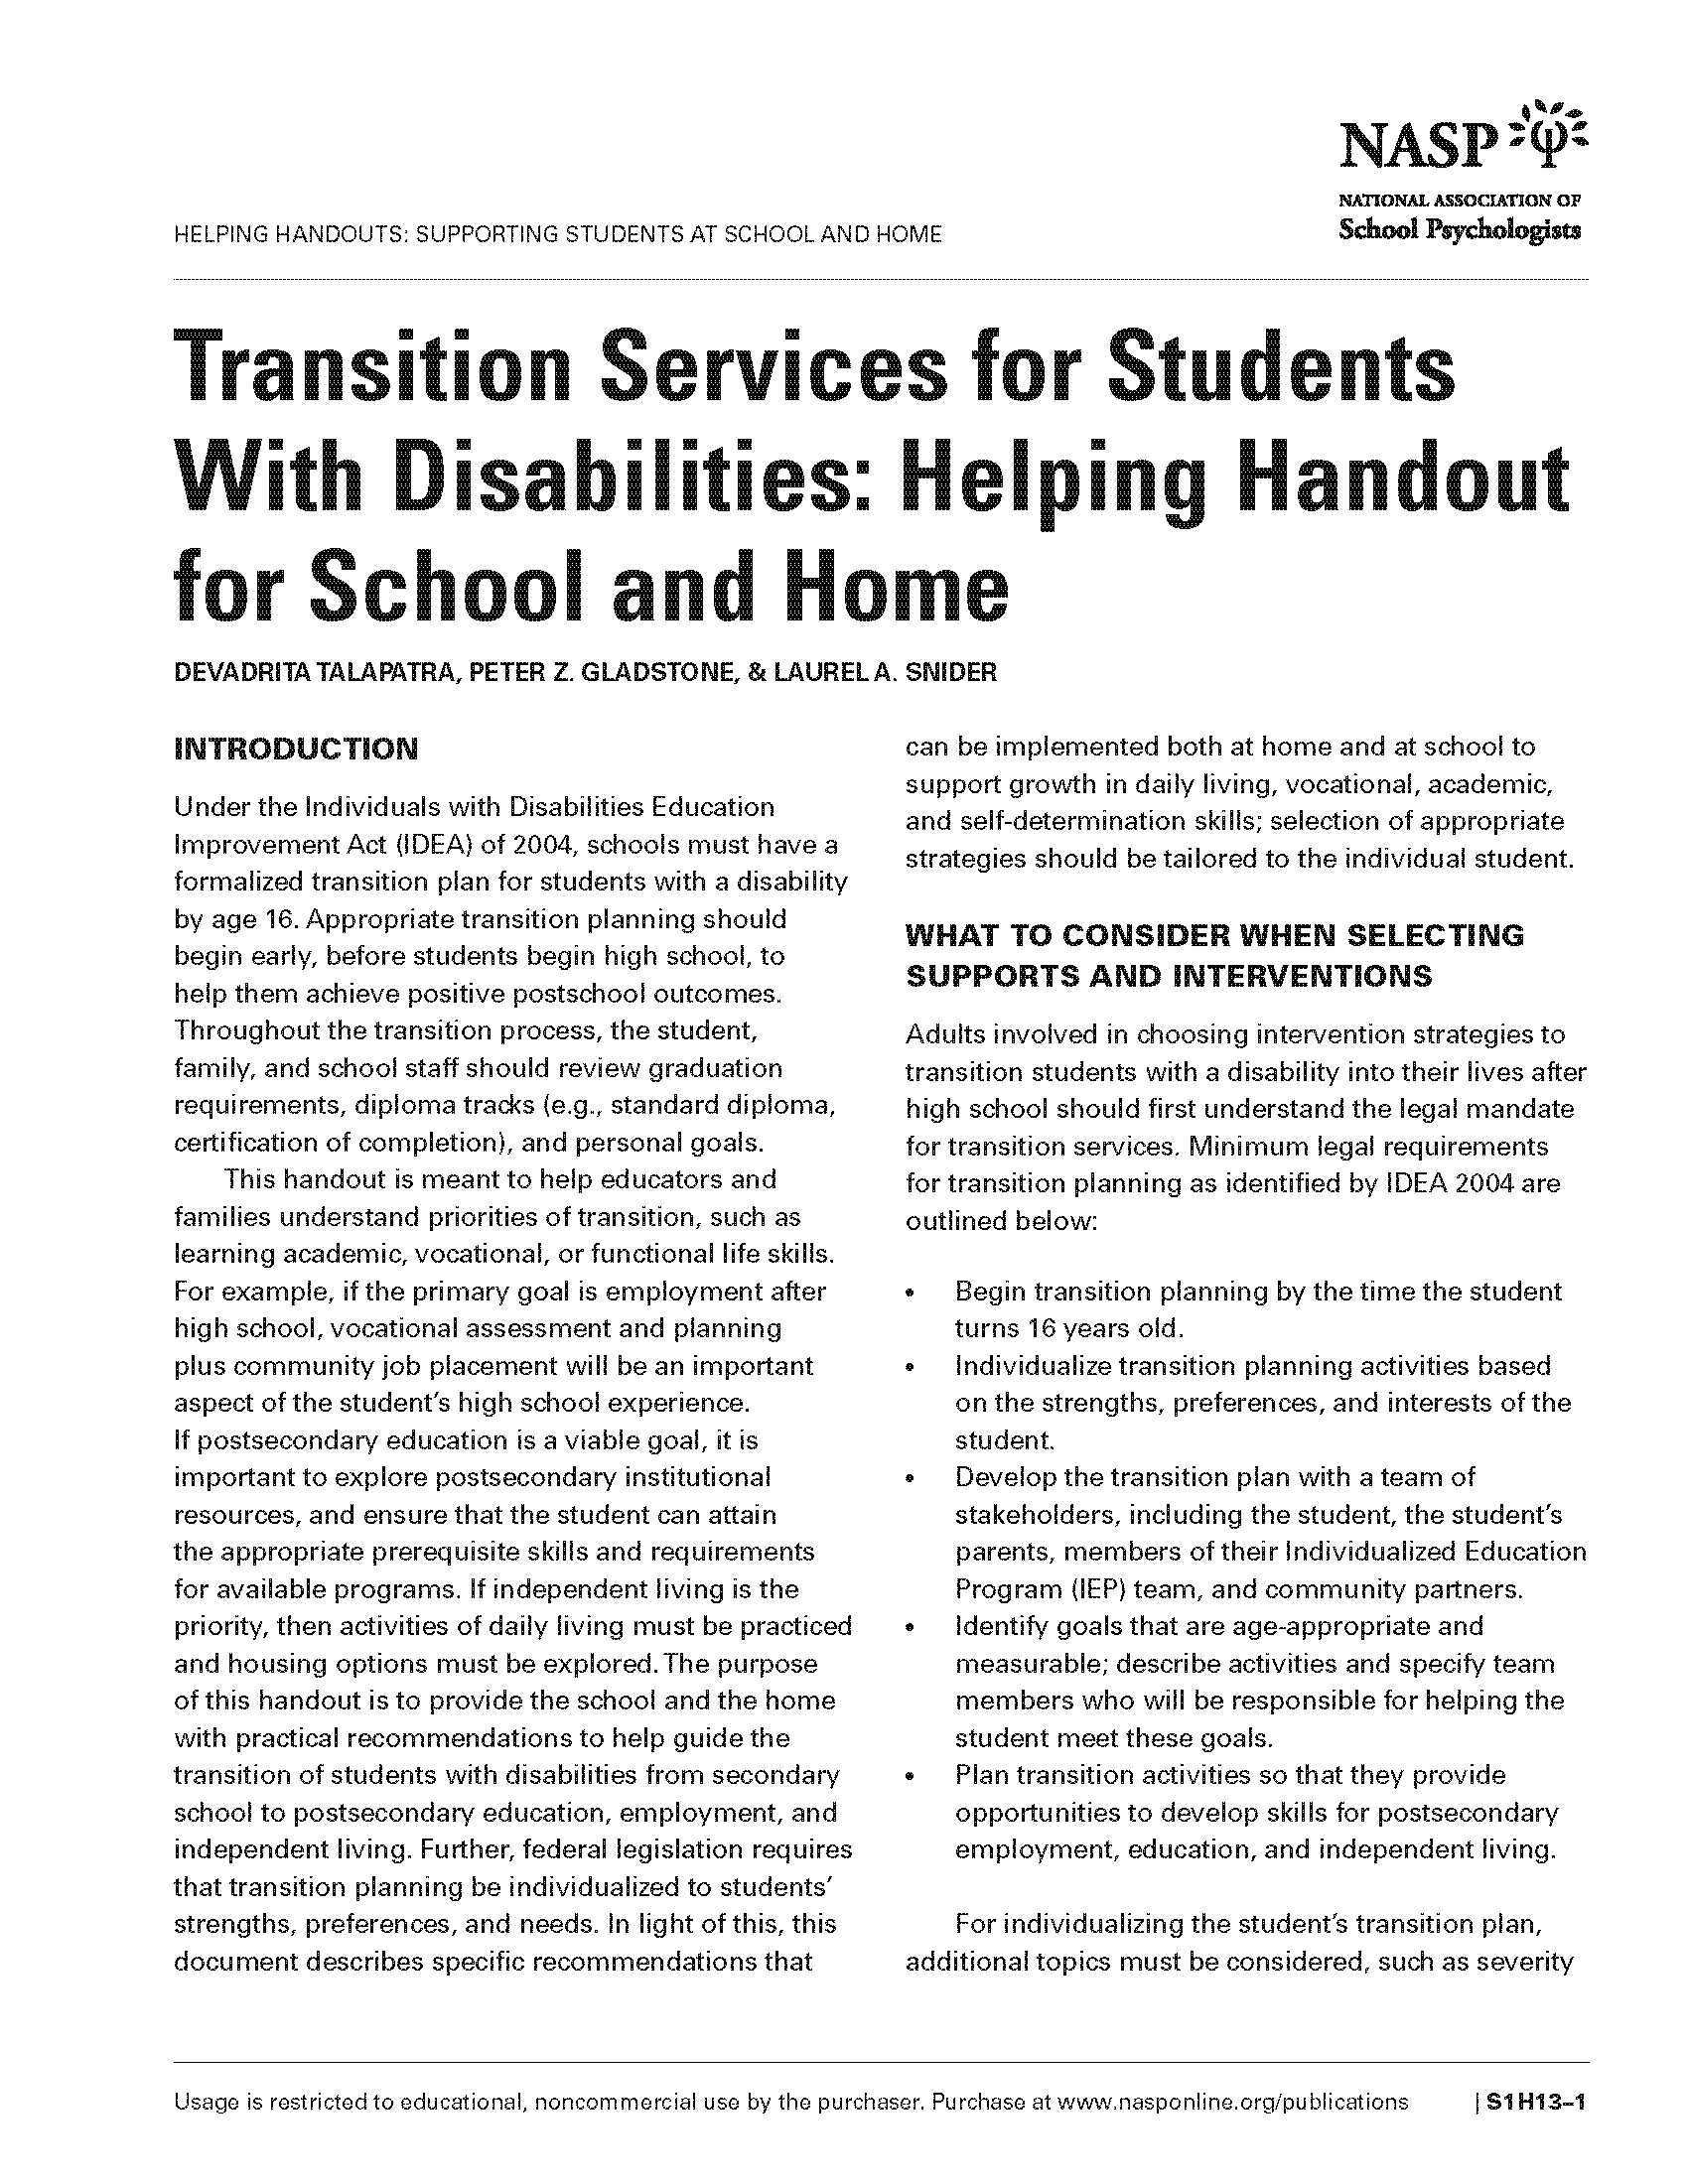 Transition Services for Students With Disabilities: Helping Handout for School and Home